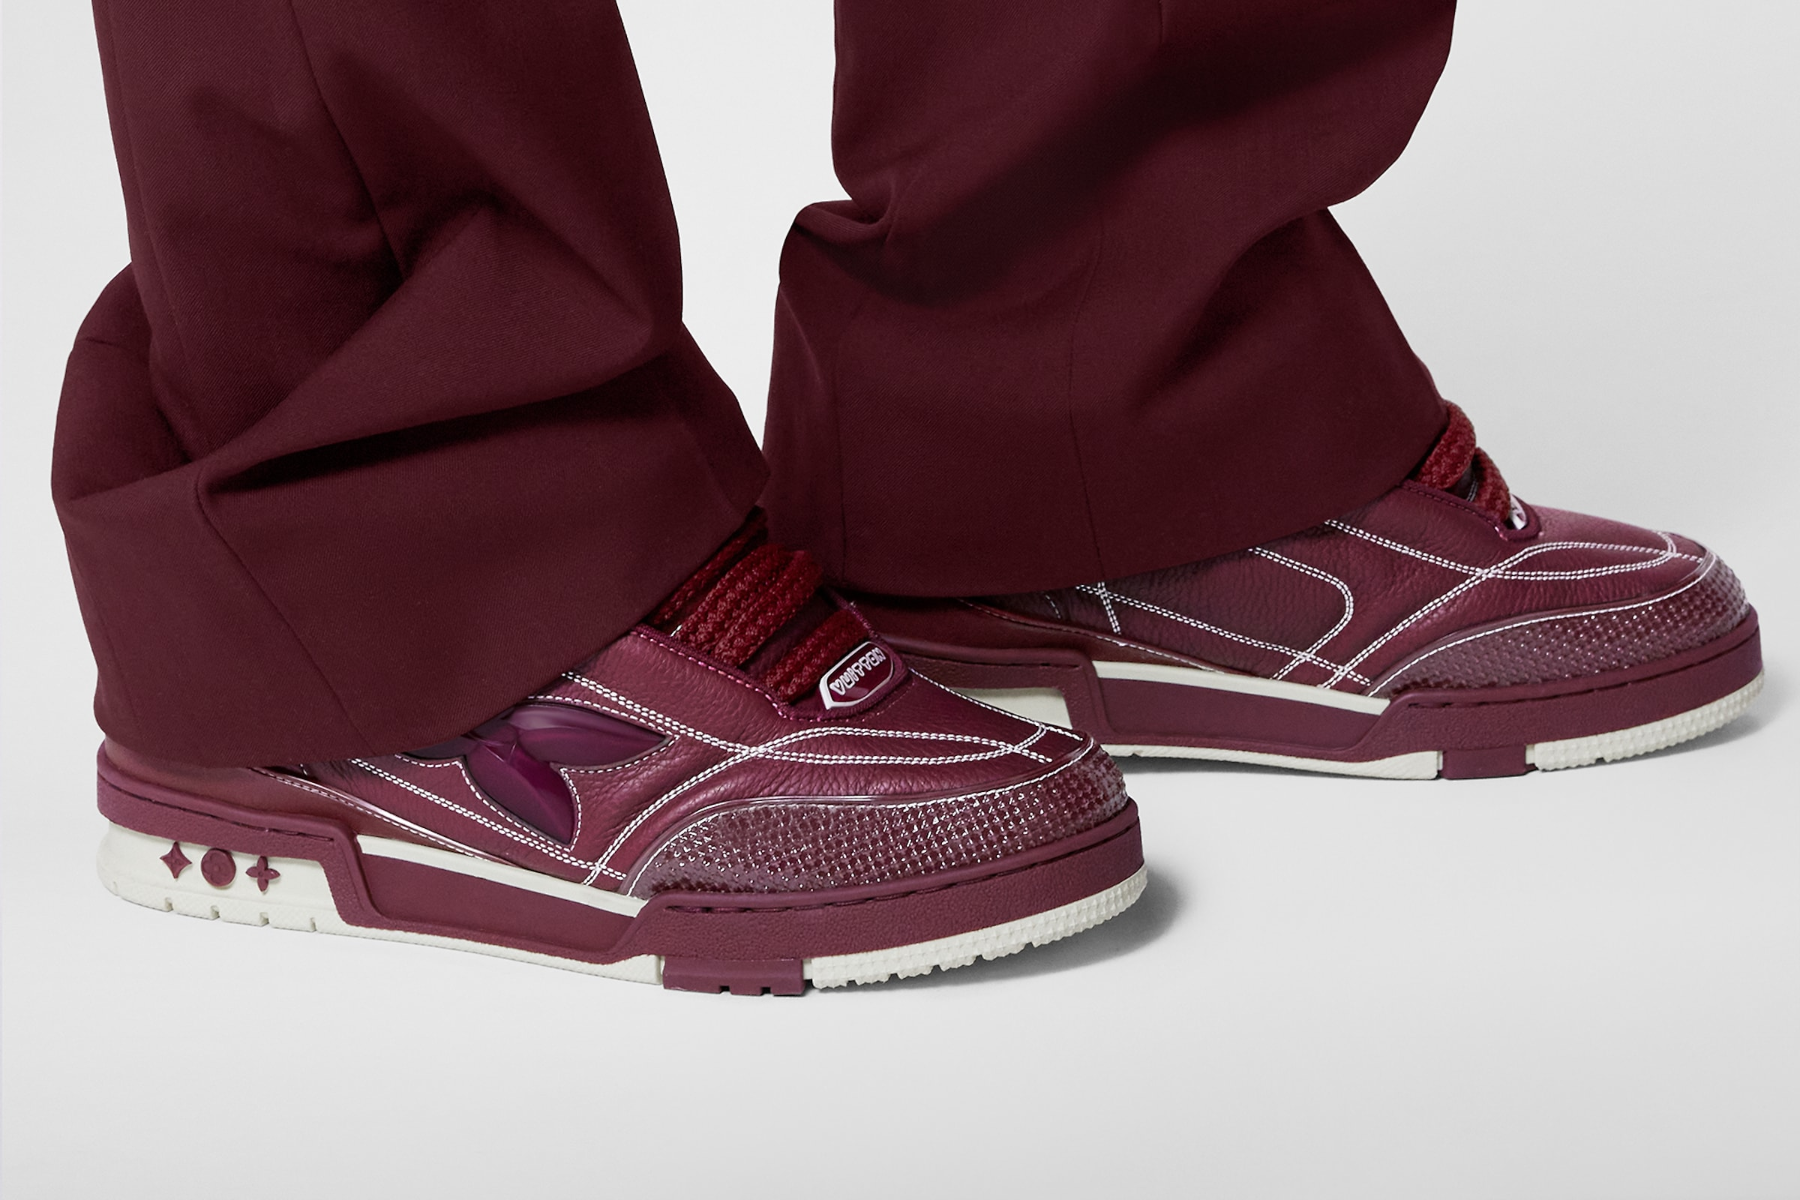 Louis Vuitton Drops First Skate Shoe in Collaboration With Lucien